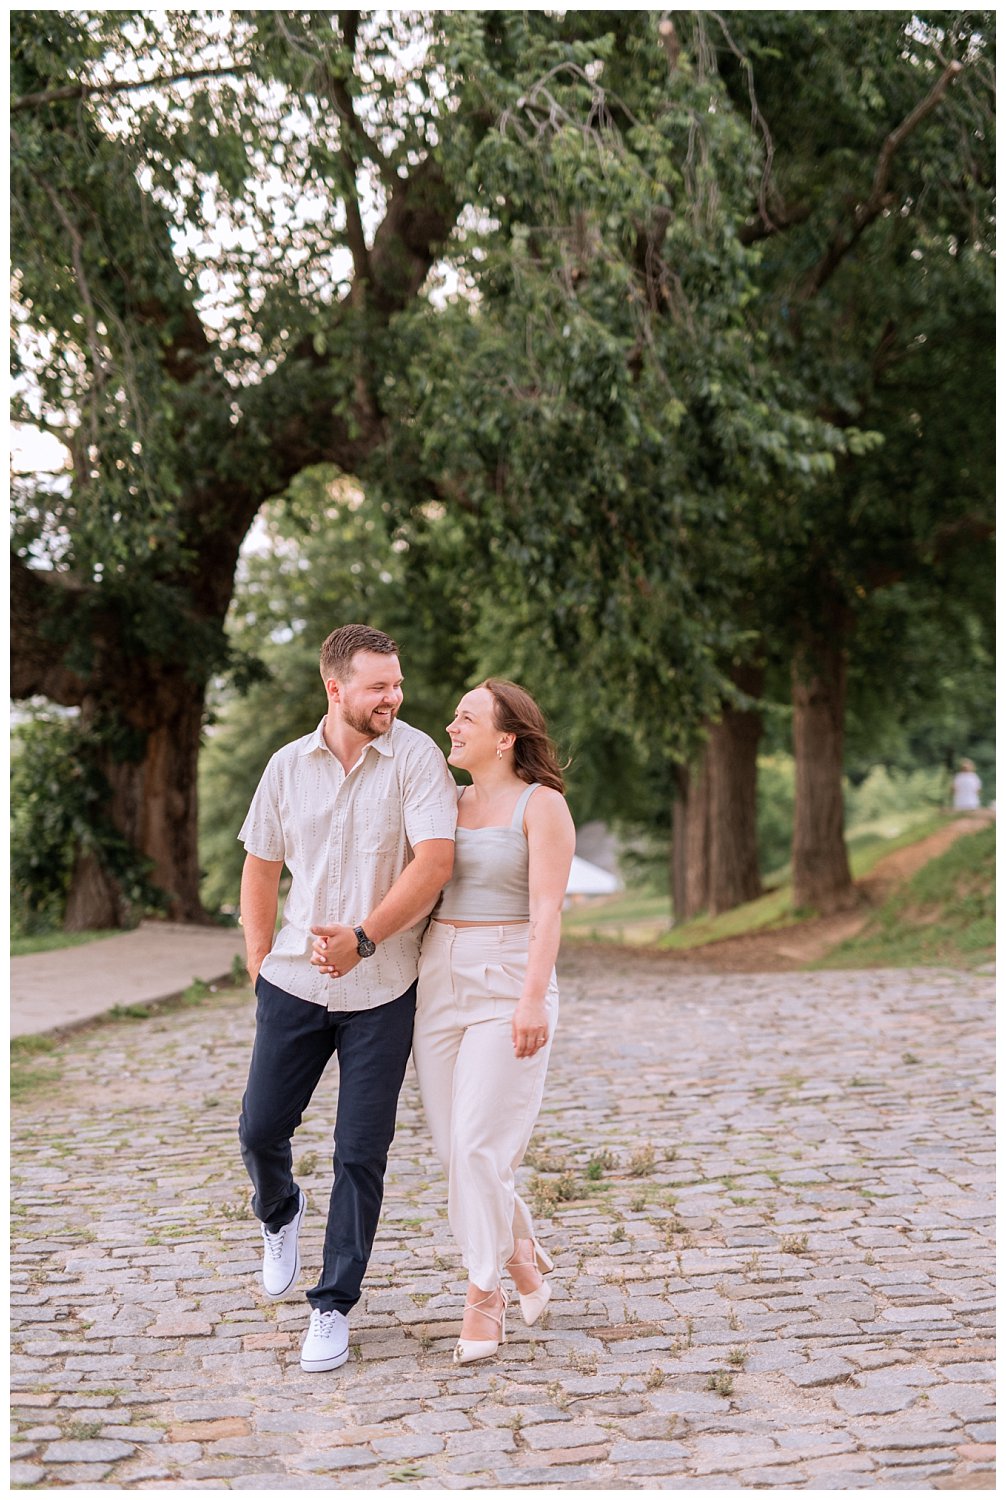 Spring engagement portraits at VMFA & Libby Hill in Richmond, Virginia. Photographed by Virginia wedding photographer Heather Dodge